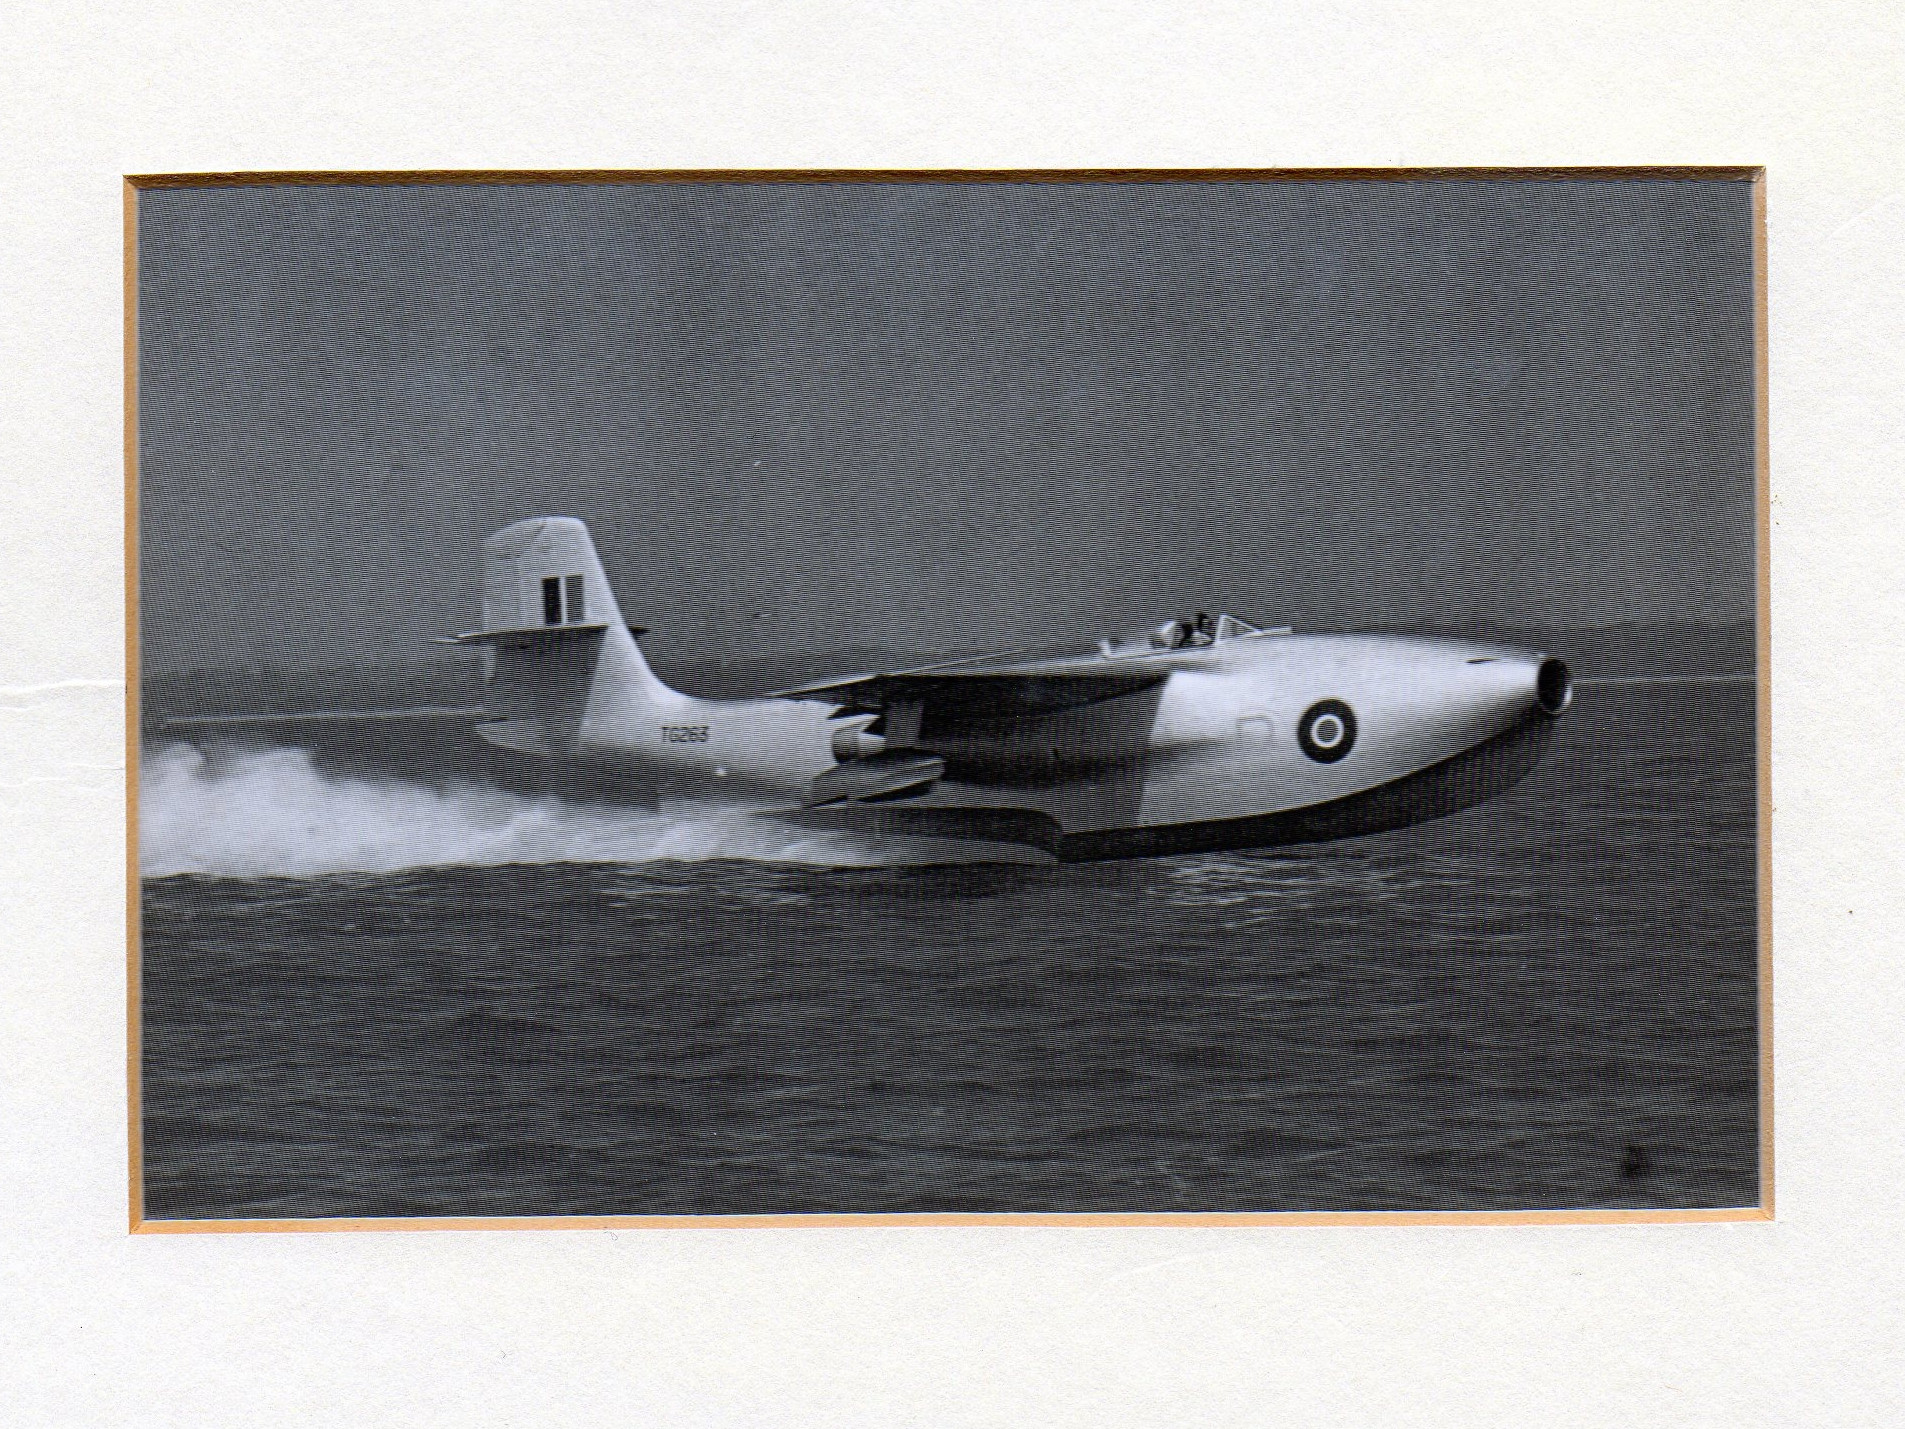 Sra1 Saunders Roe Jet Flying Boat New Forest Knowledge